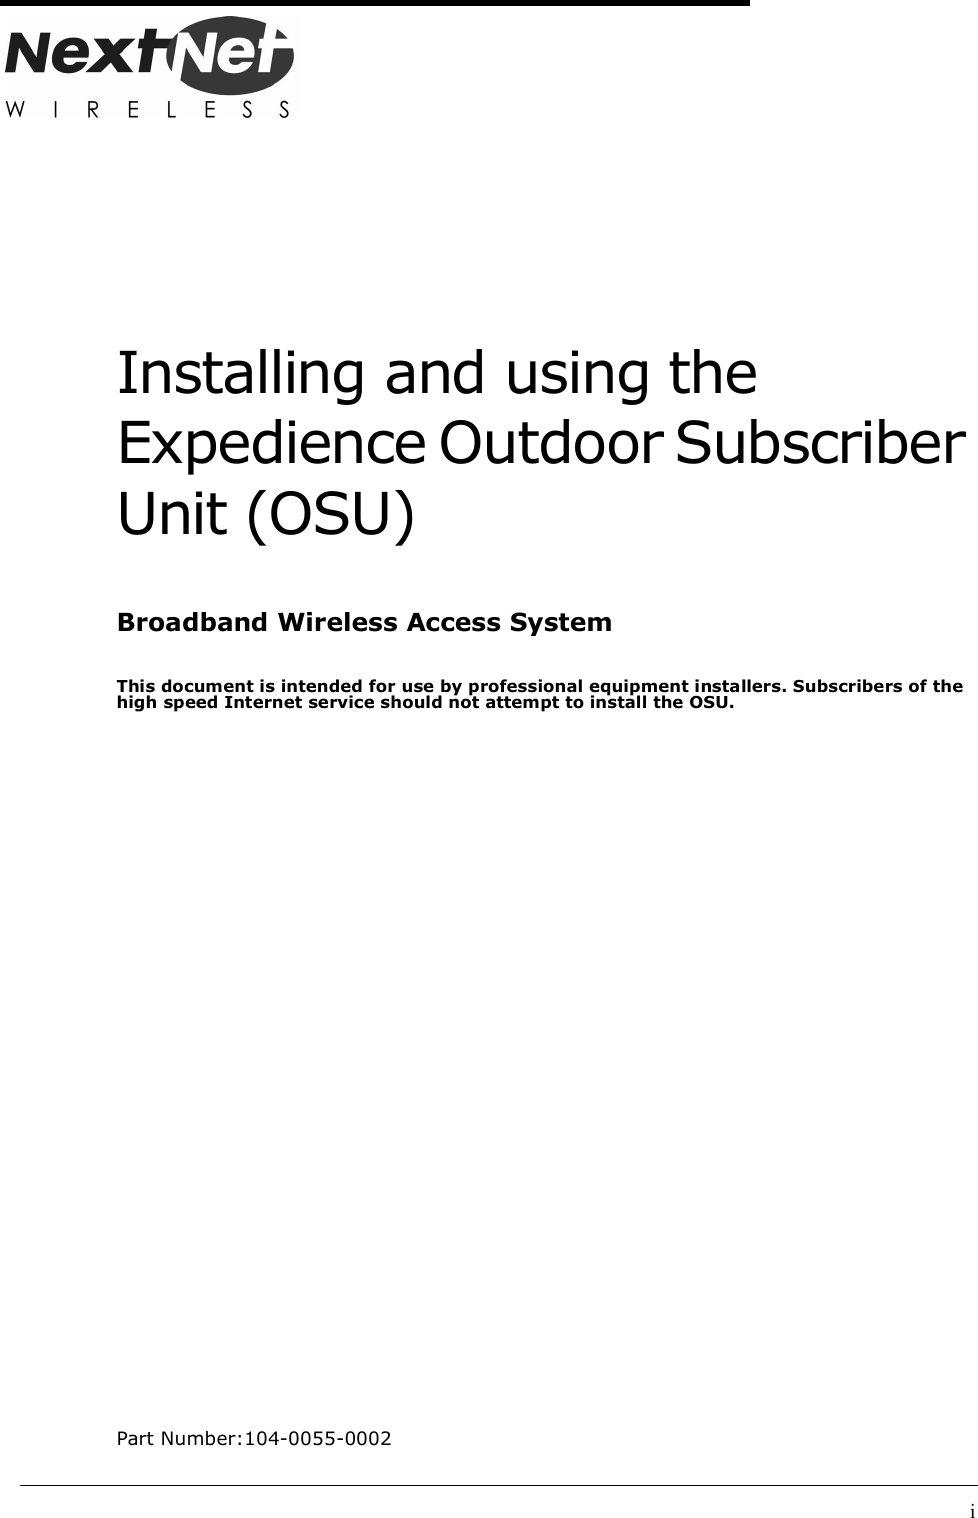 iInstalling and using the Expedience Outdoor Subscriber Unit (OSU)Broadband Wireless Access SystemThis document is intended for use by professional equipment installers. Subscribers of the high speed Internet service should not attempt to install the OSU.Part Number:104-0055-0002